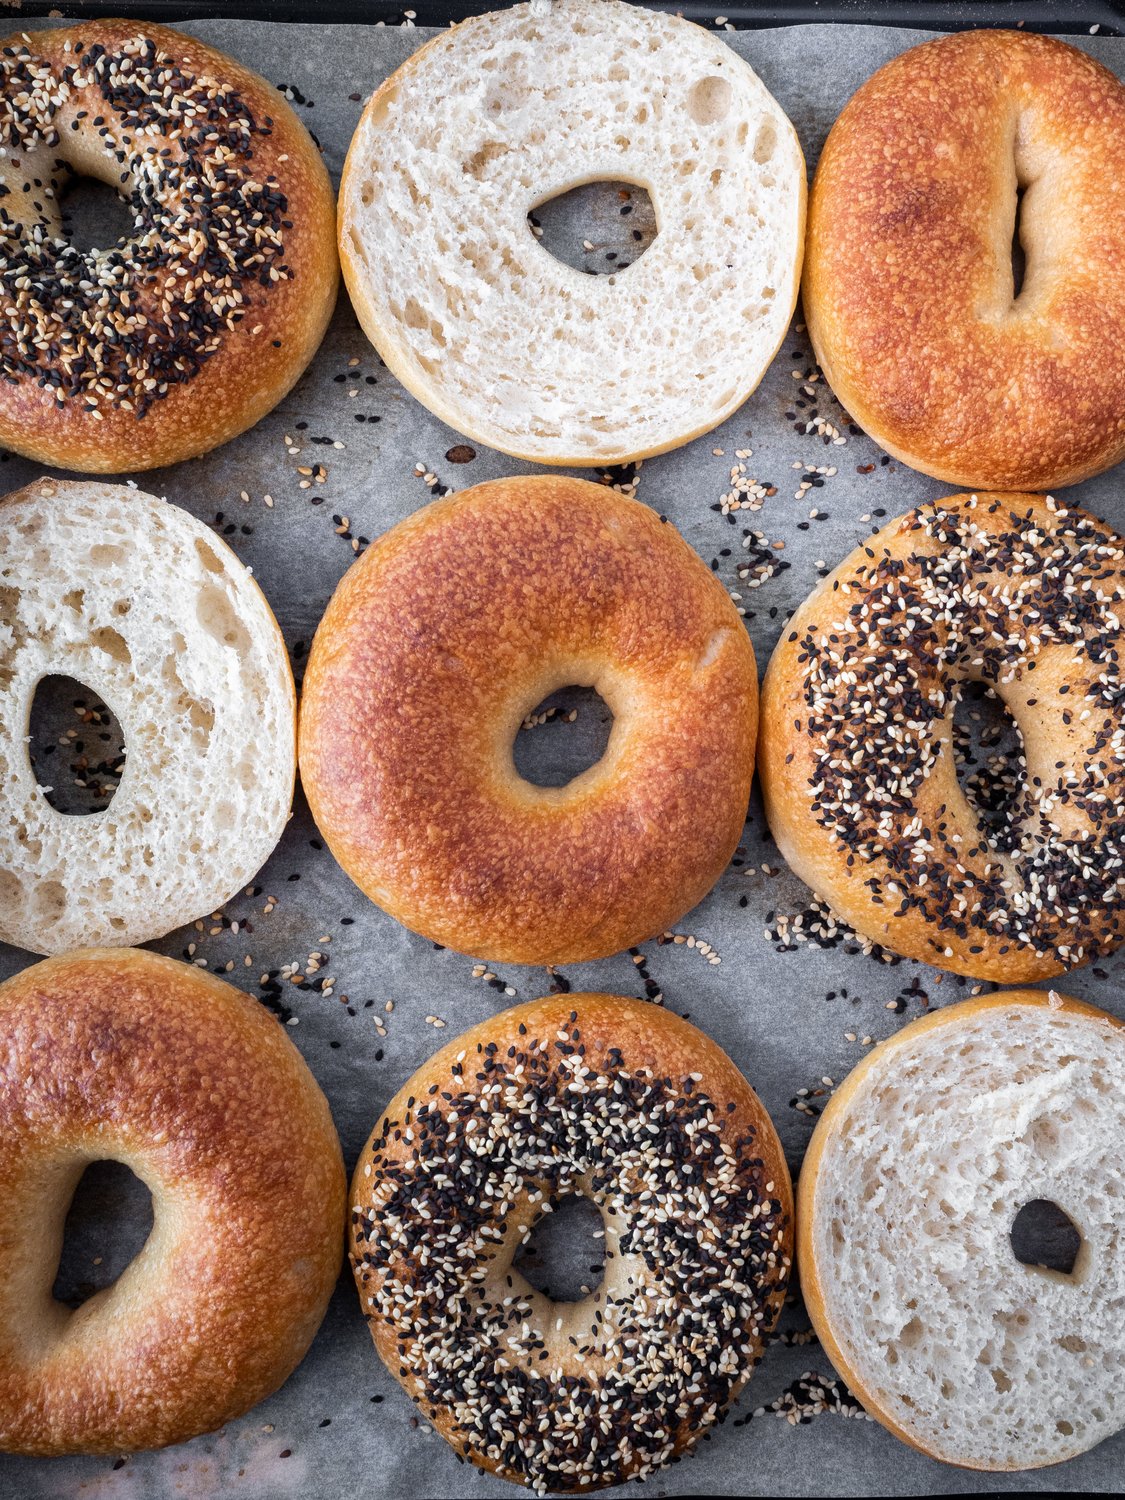 So much wonderfulness. If bagels give you joy too, consider being a bagel ambassador for the Sullivan Chamber's Bagel Festival.